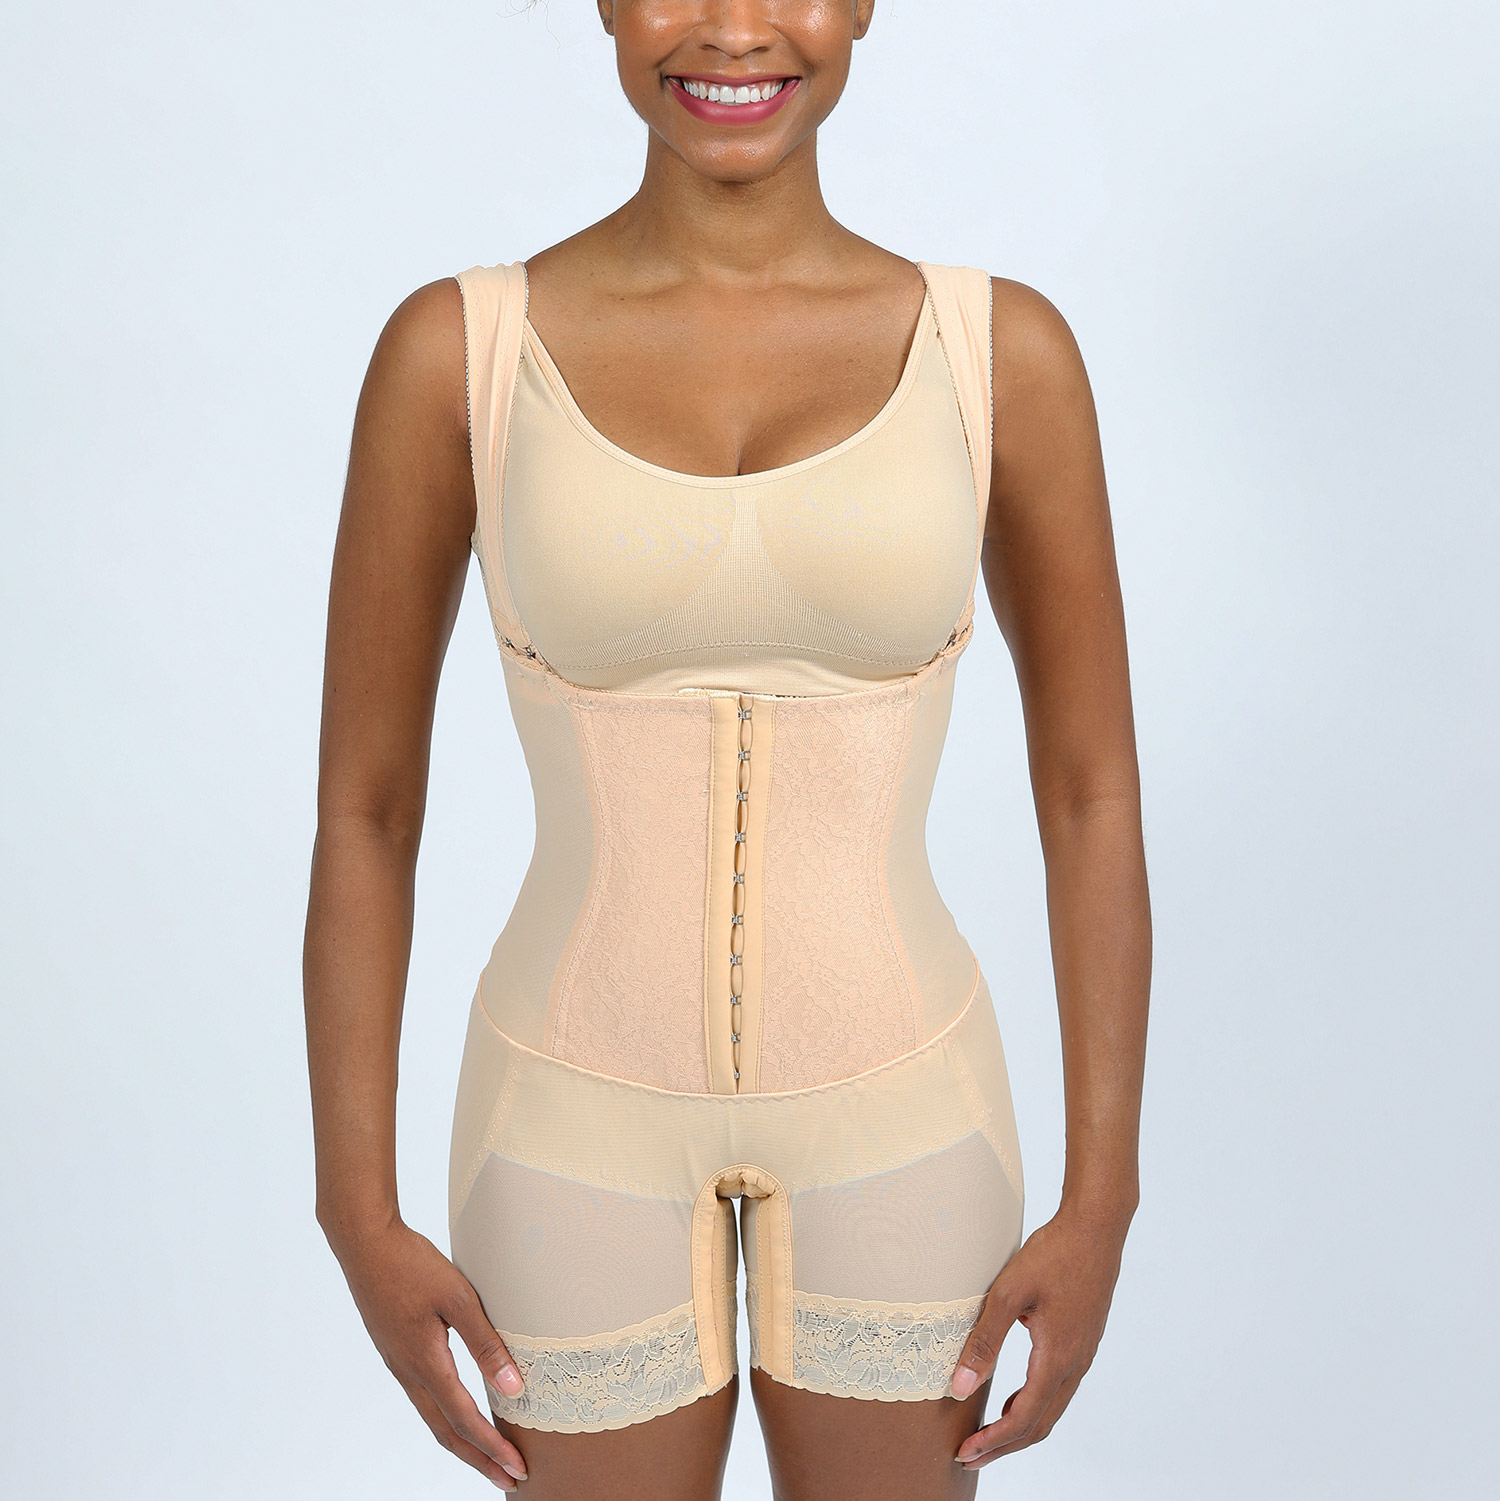 Sizing chart for: - Ardyss Back Support Vest Waist Cincher Style